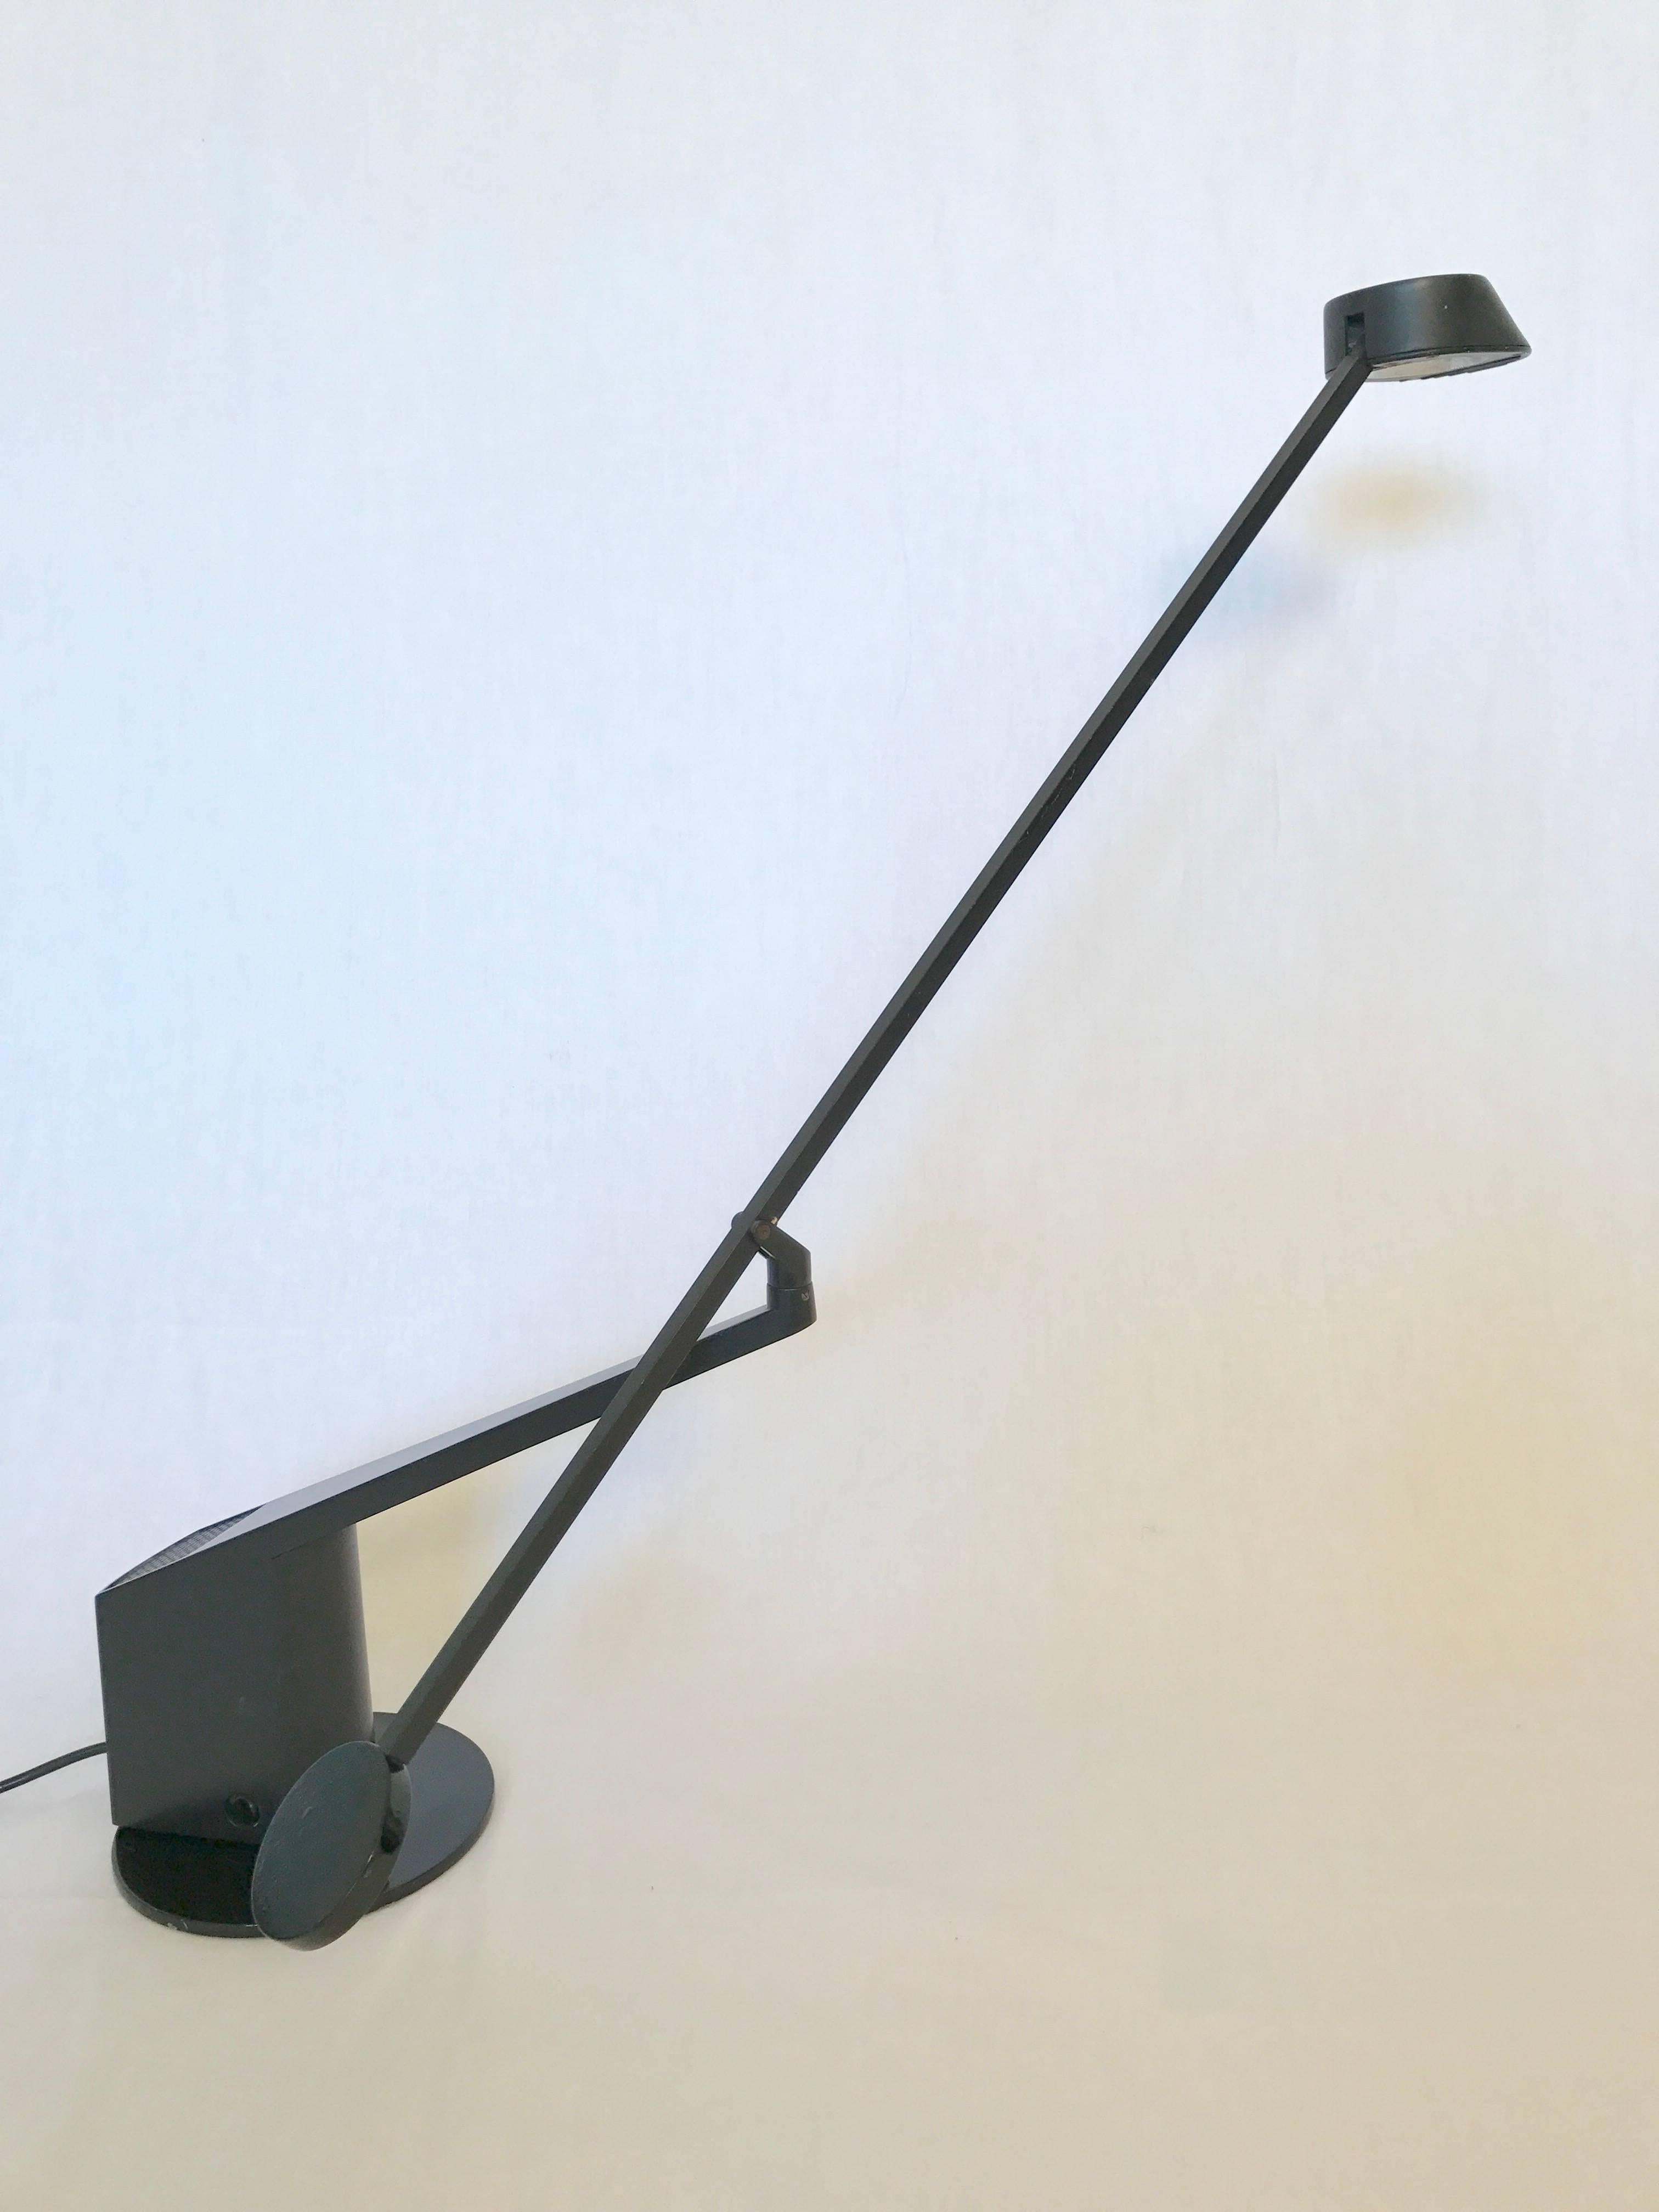 An adjustable black lacquered, aluminum allow table or desk lamp by Rodolfo Bonetto for iGuzzini.